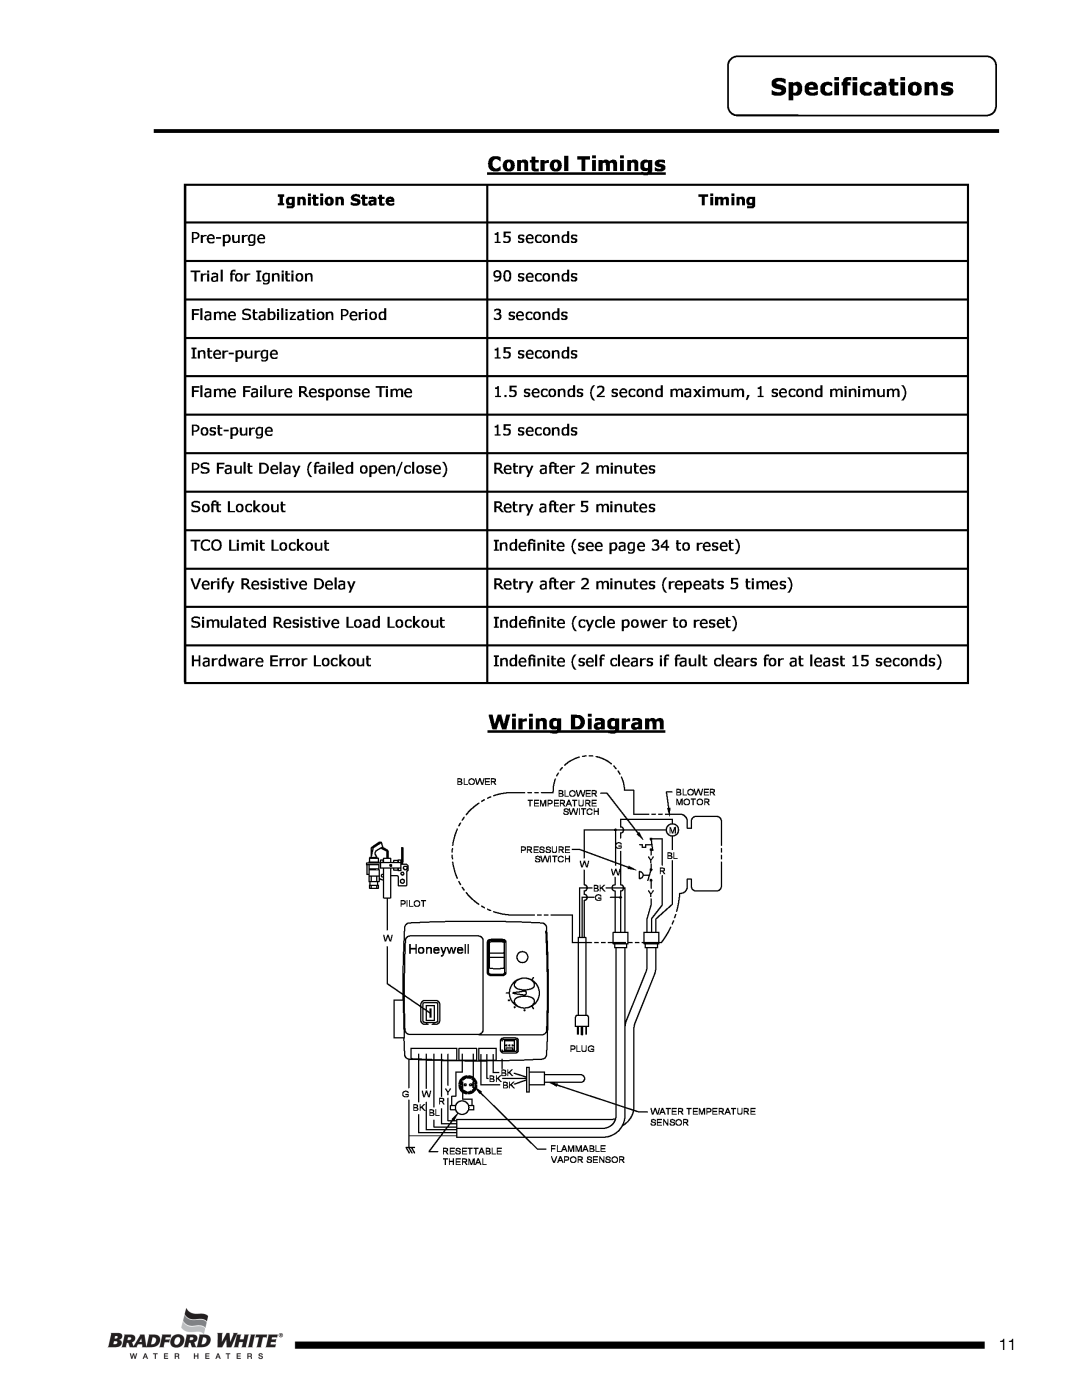 Bradford-White Corp U4TW60T*FRN, U4TW50T*FRN Control Timings, Wiring Diagram, Specifications, Page, Ignition State 